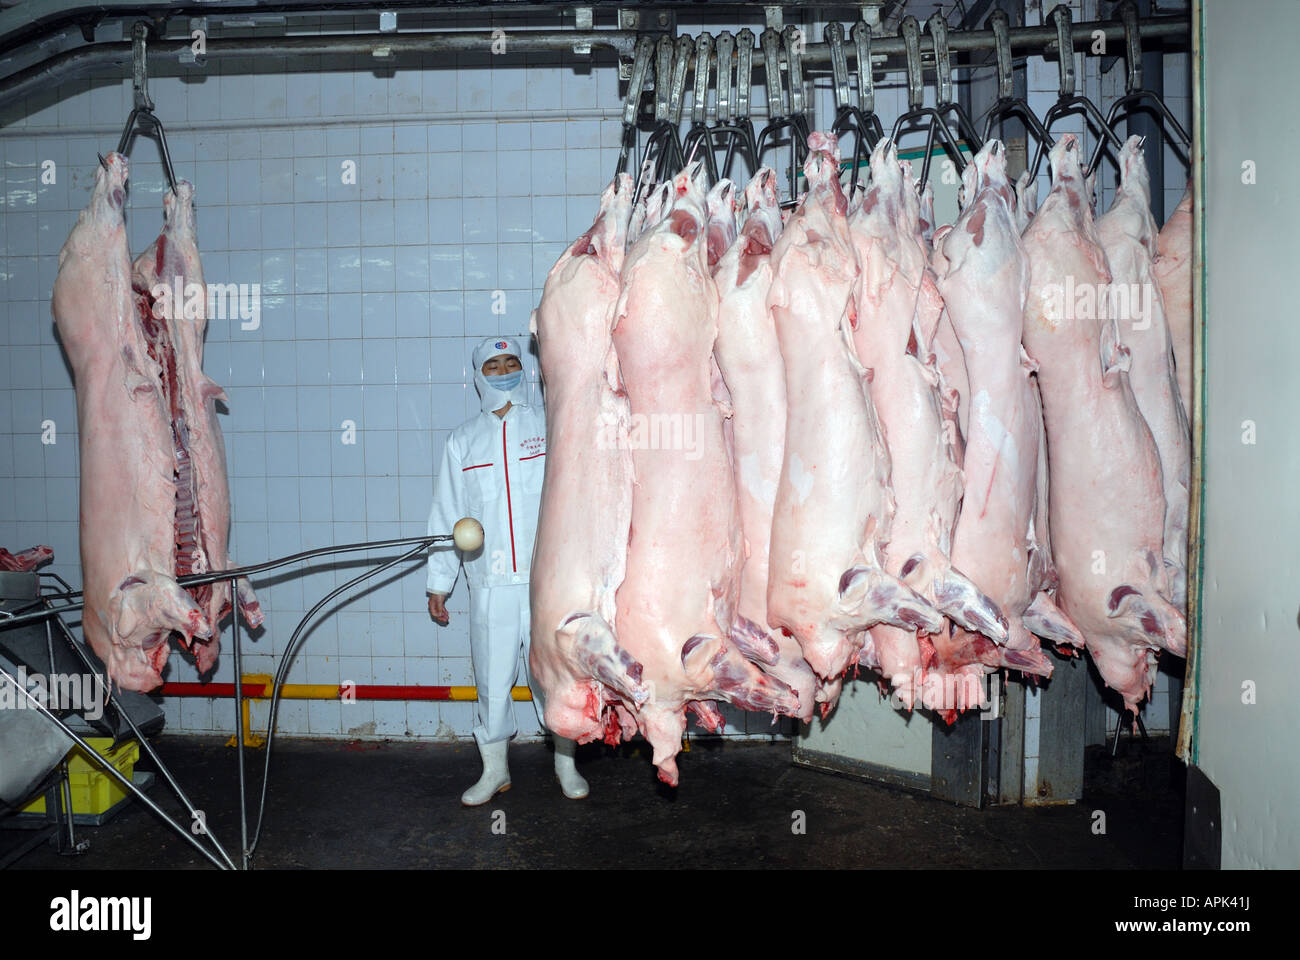 Carcasses of pigs Shineway Shuanghui Industrial Group meat processing plant Pork production line Henan Province China Stock Photo